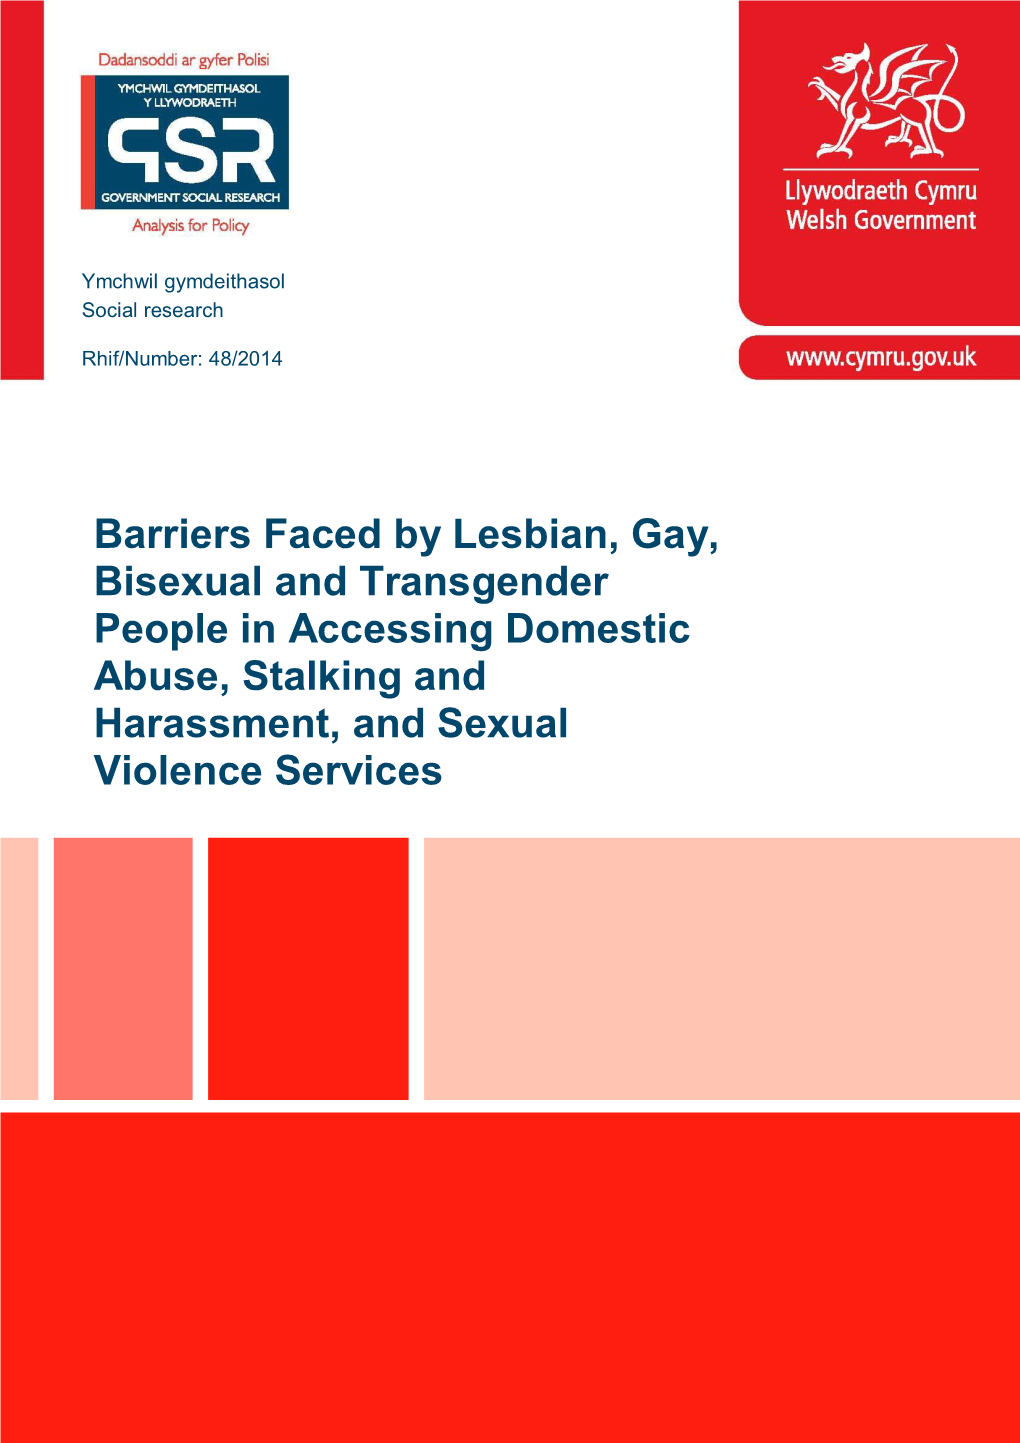 Barriers Faced by Lesbian, Gay, Bisexual and Transgender People in Accessing Domestic Abuse, Stalking, Harassment and Sexual Violence Services